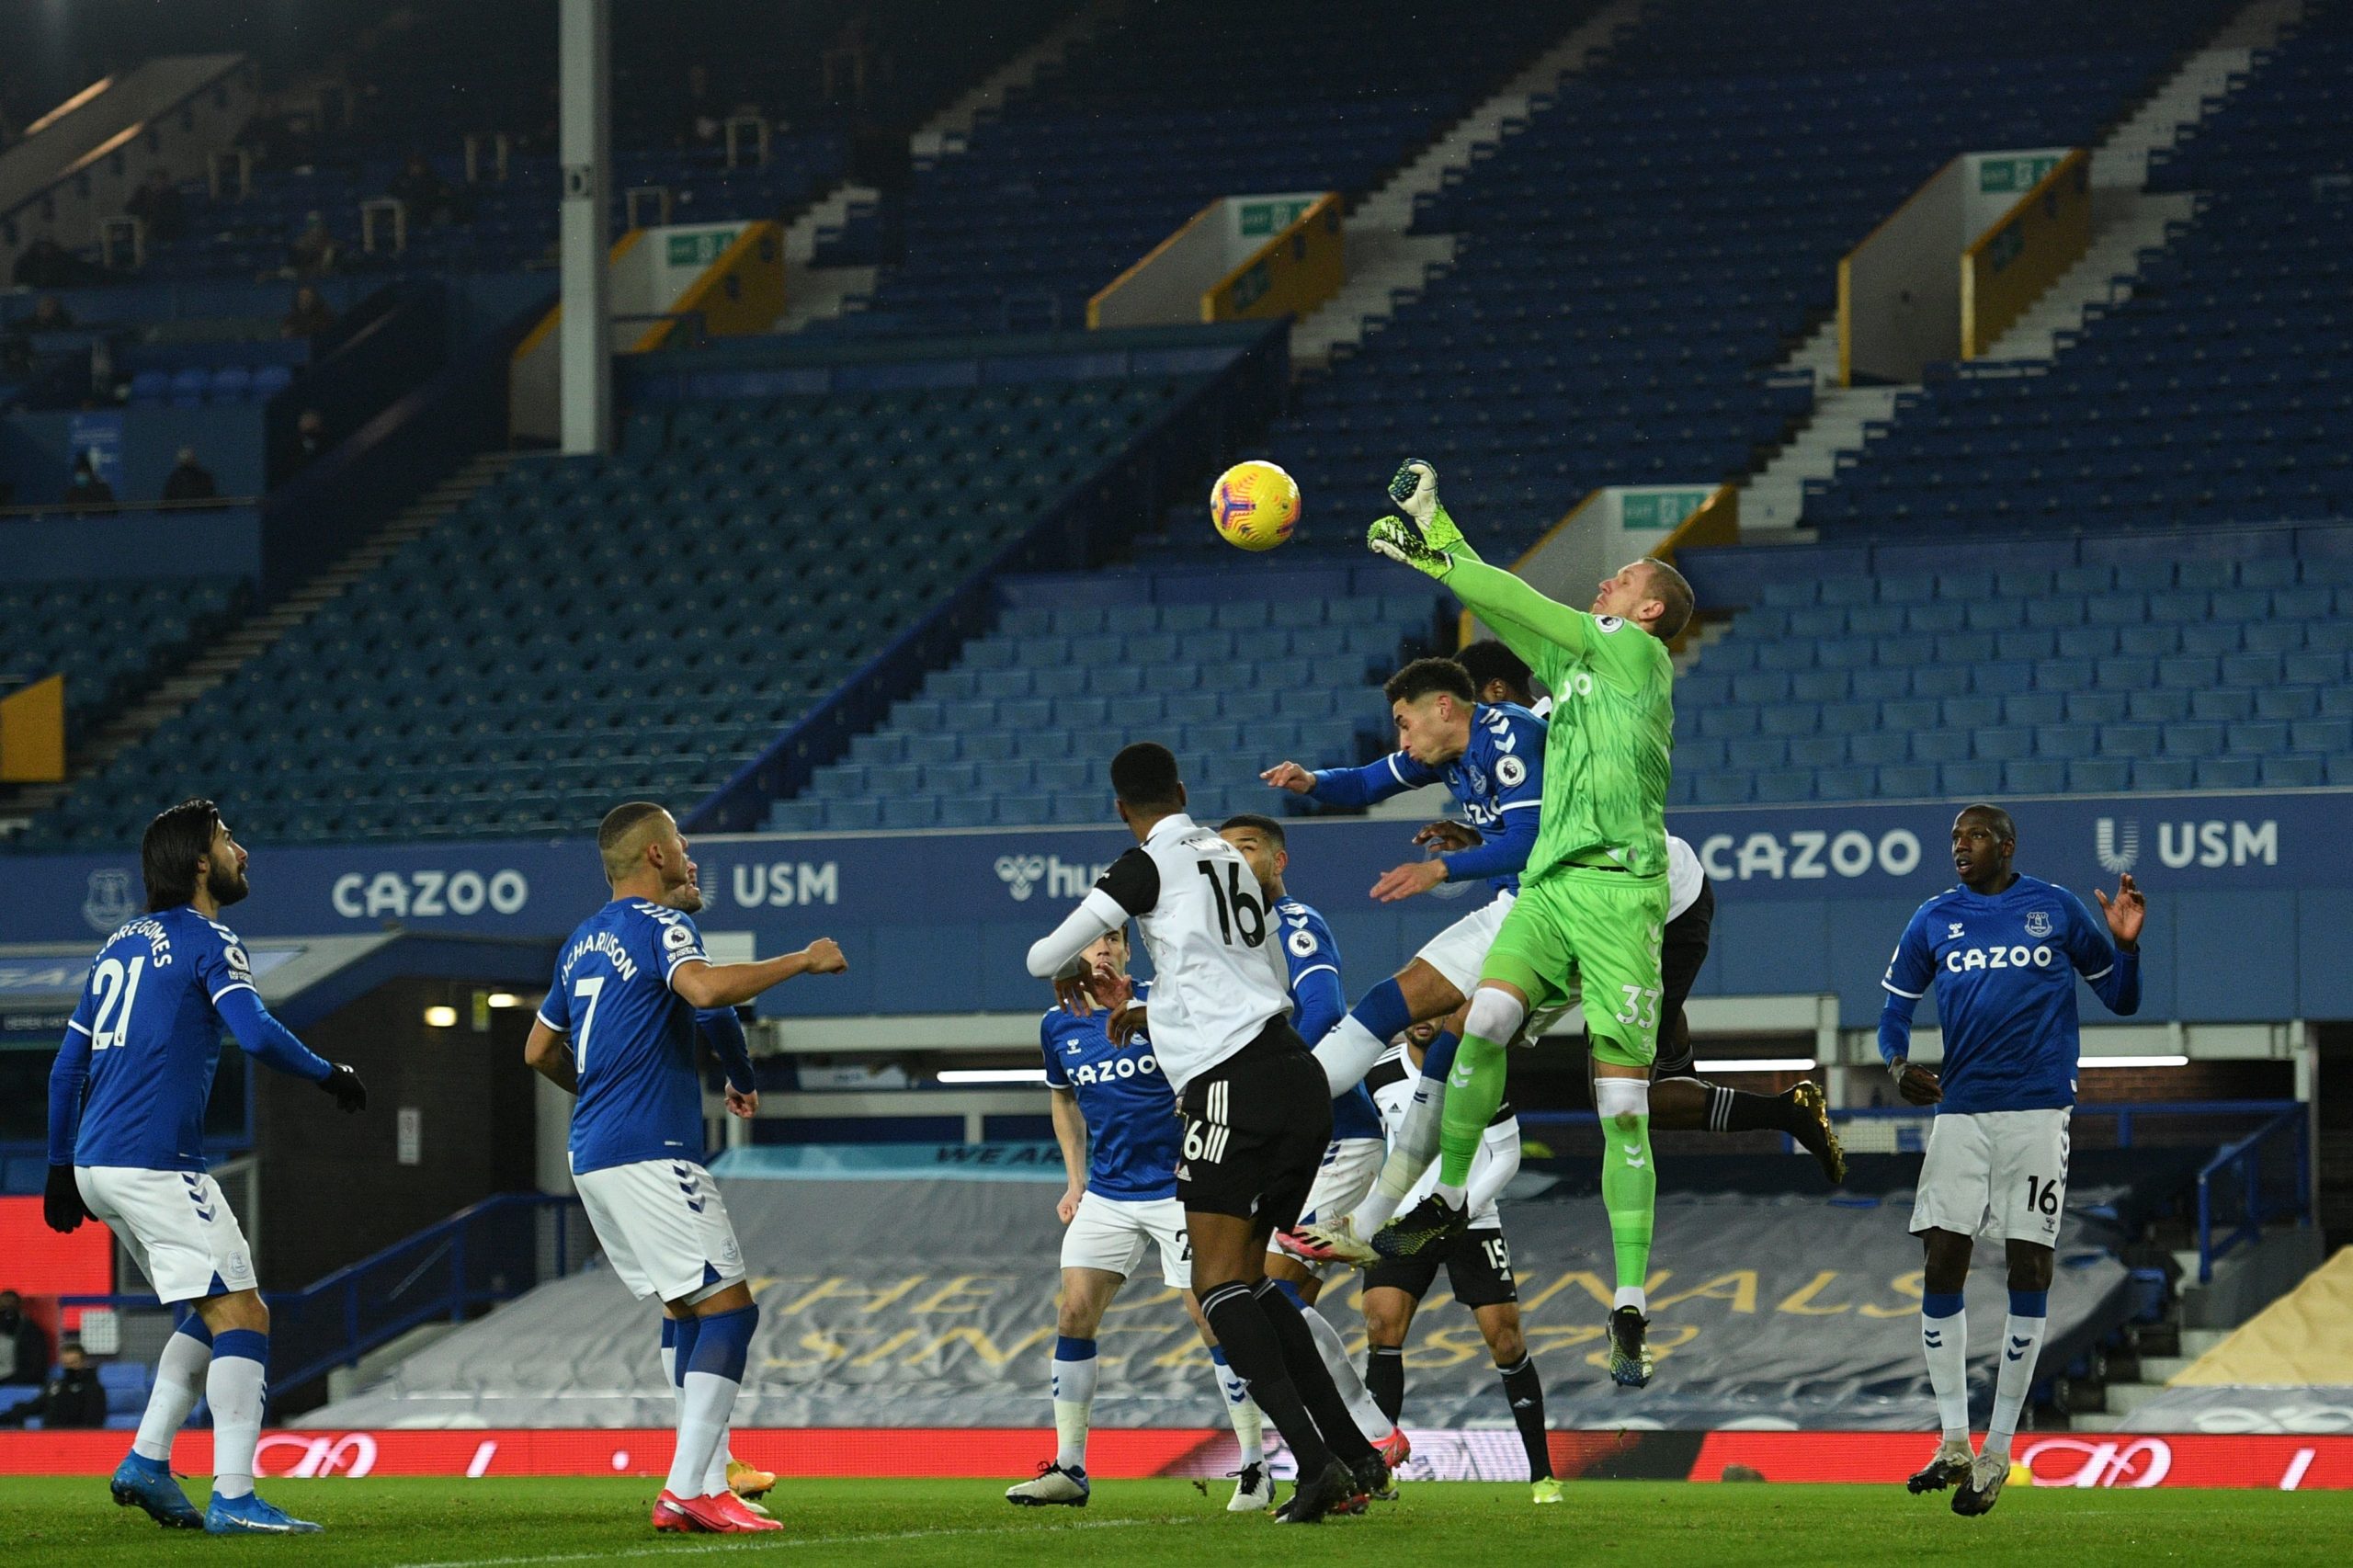 Everton Players Rated In Disappointing Loss Vs Fulham (Everton players are in action in the photo)